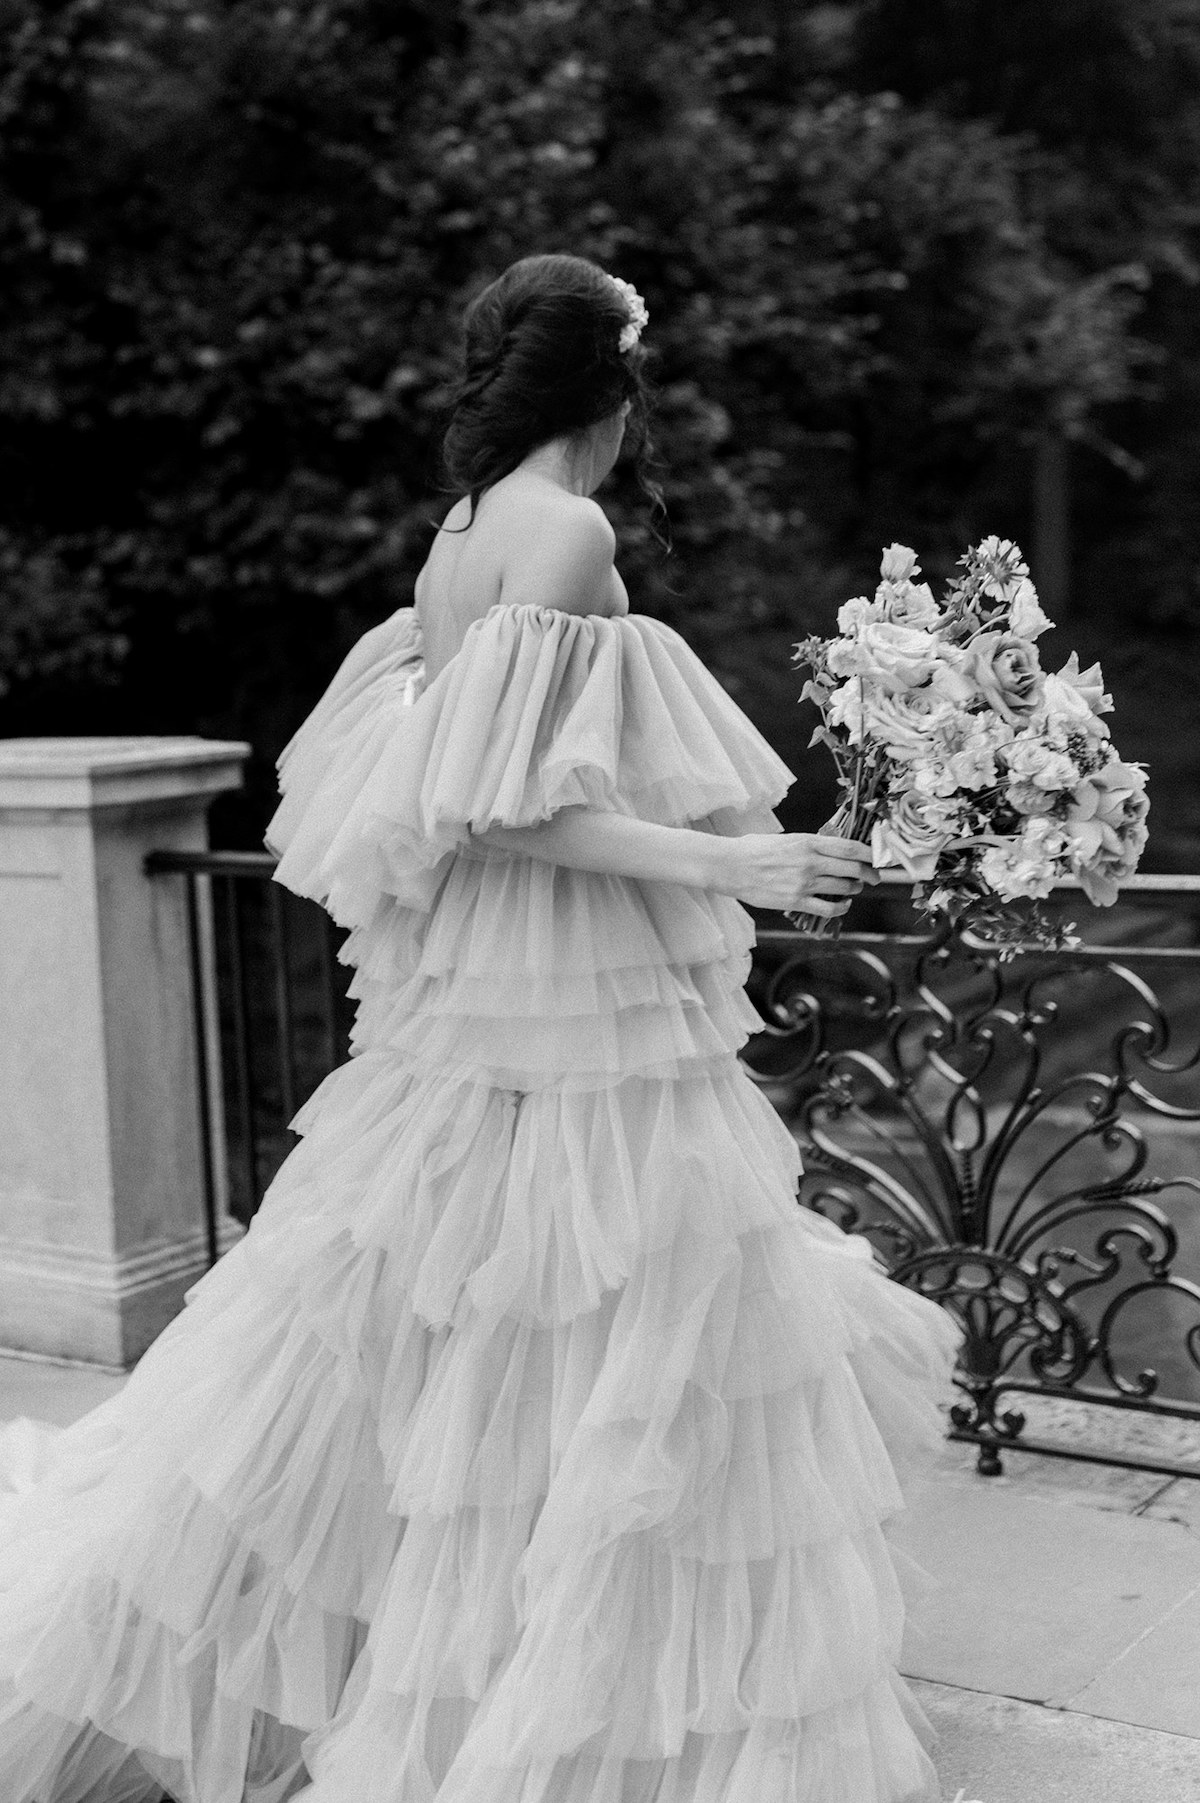 Bride, adorned in a tiered couture gown in soft mauve, radiates timeless beauty in a stunning black and white portrait at Longwood Gardens.